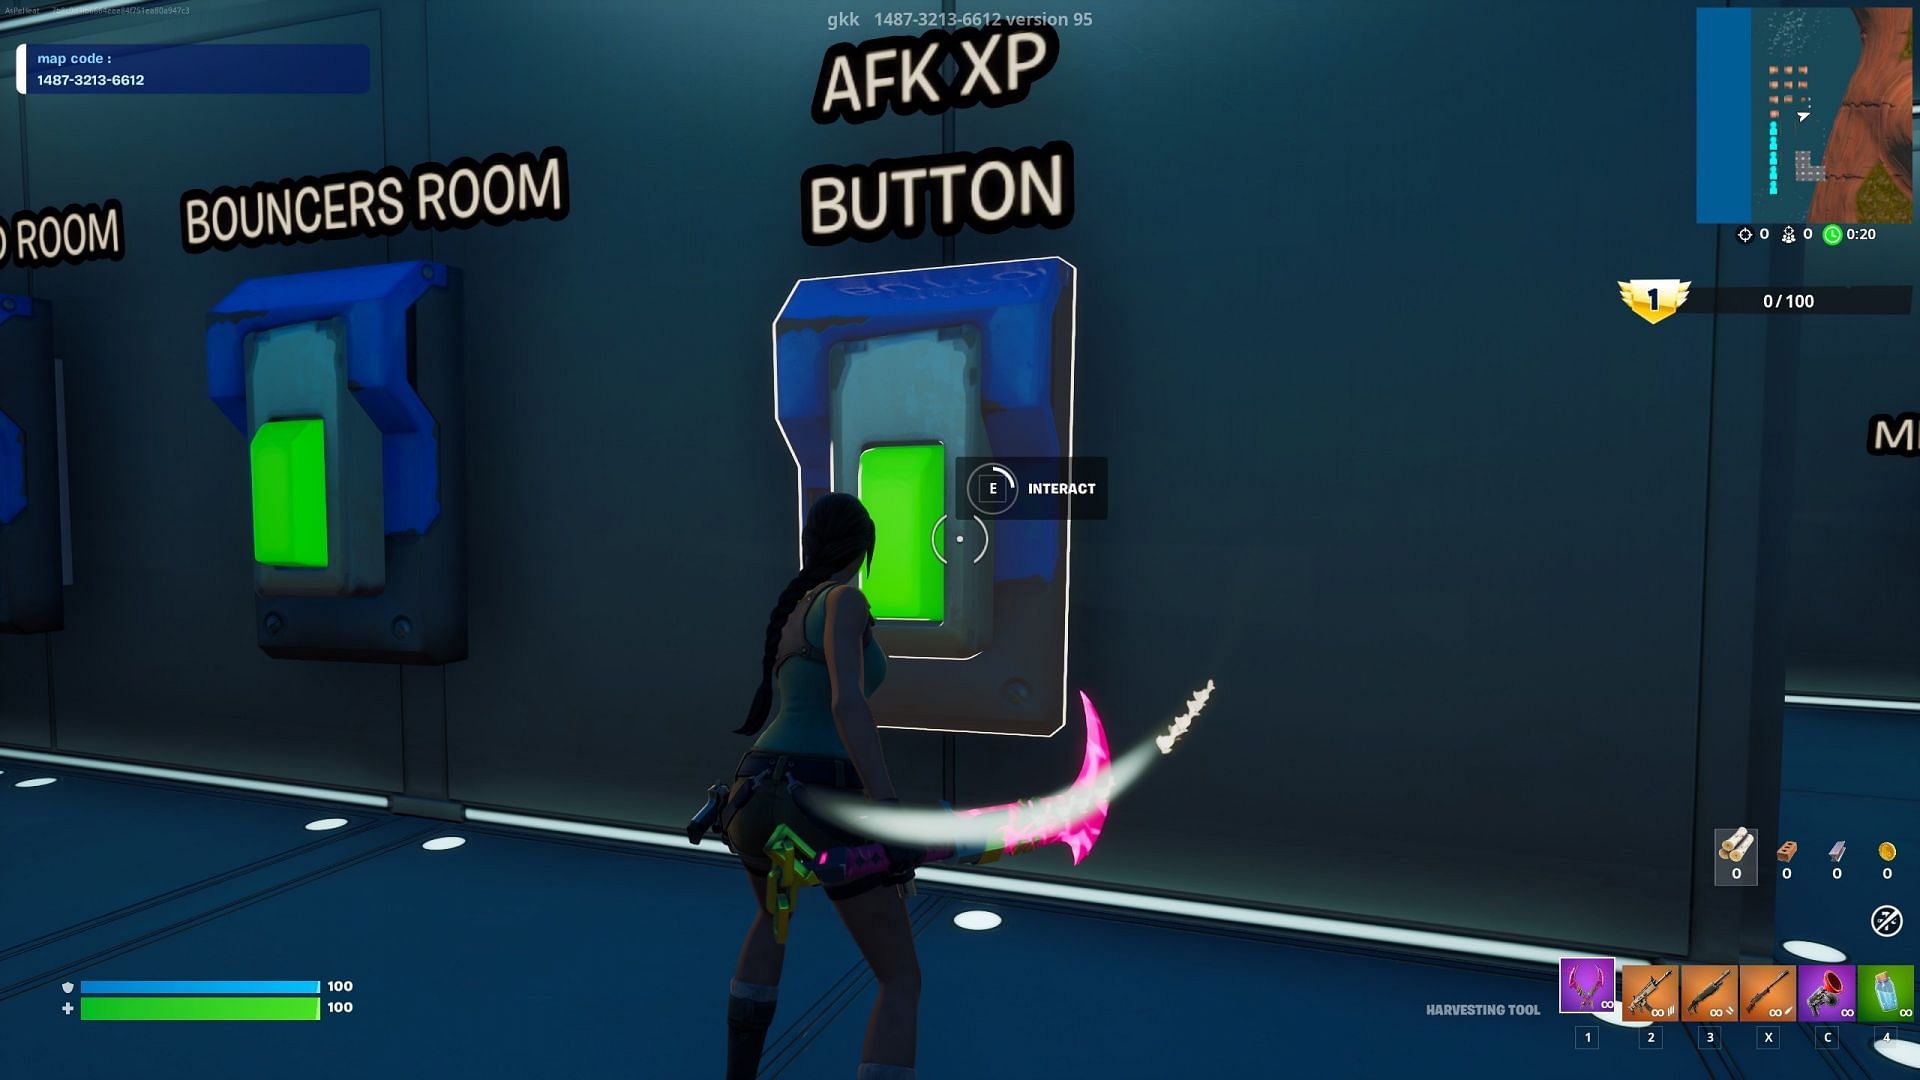 To start gaining XP, you need to interact with the AFK XP button (Image via Epic Games)